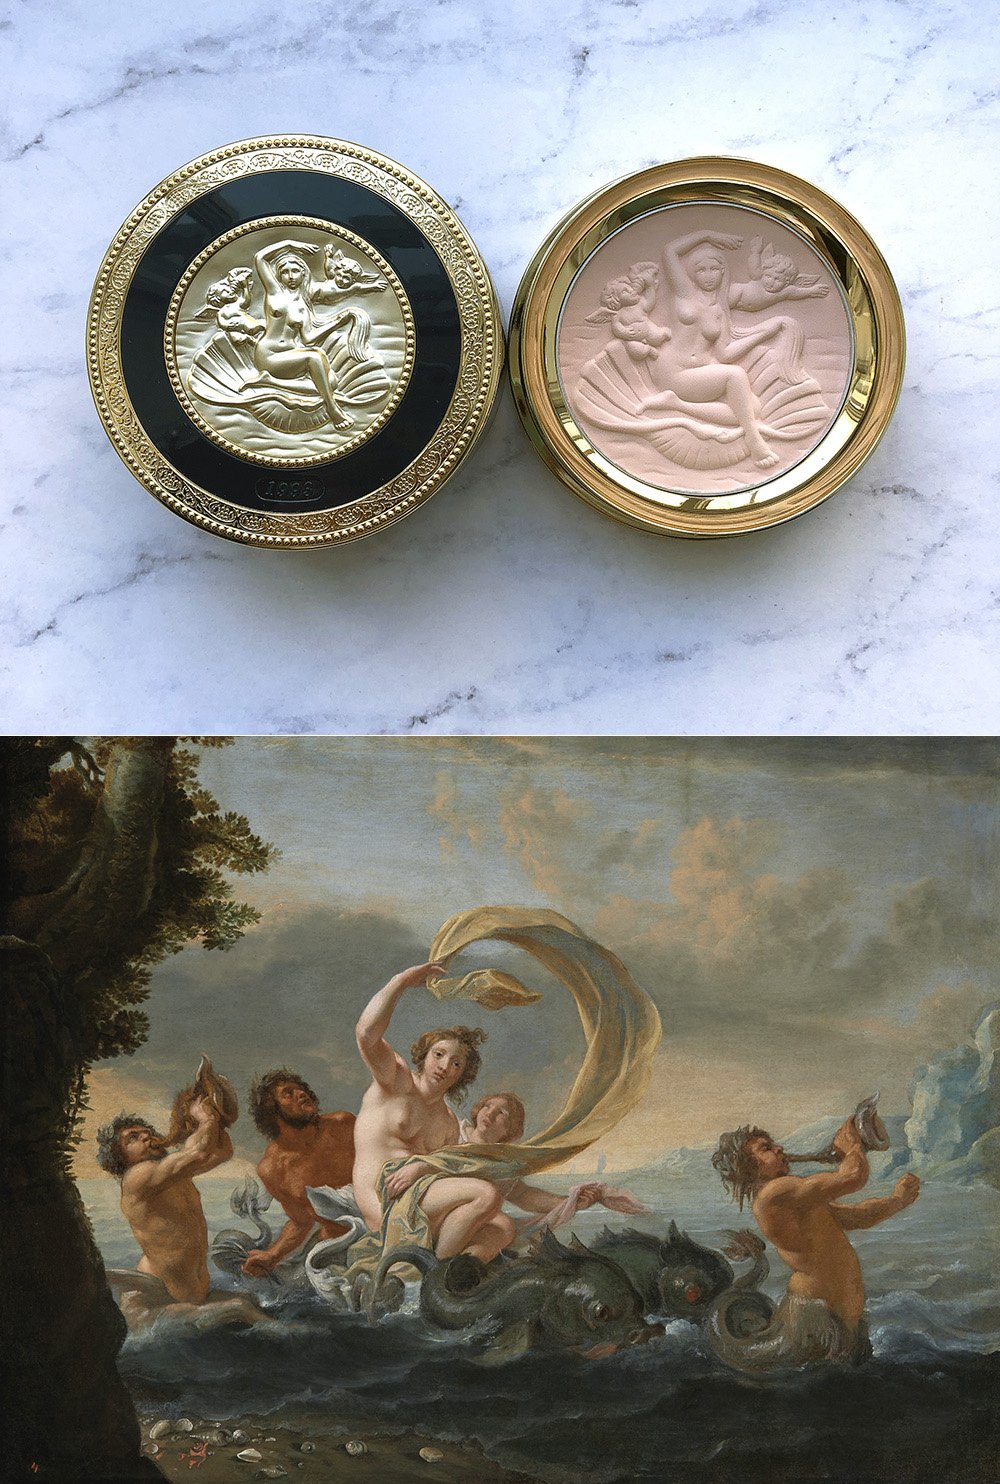   Milano Compact Kanebo, Holiday 1993   Beginning in 1991, each holiday season Japanese company Kanebo releases ornately designed compacts featuring goddess-like figures whose draping and poses referencing allegorical paintings of the Neoclassical er